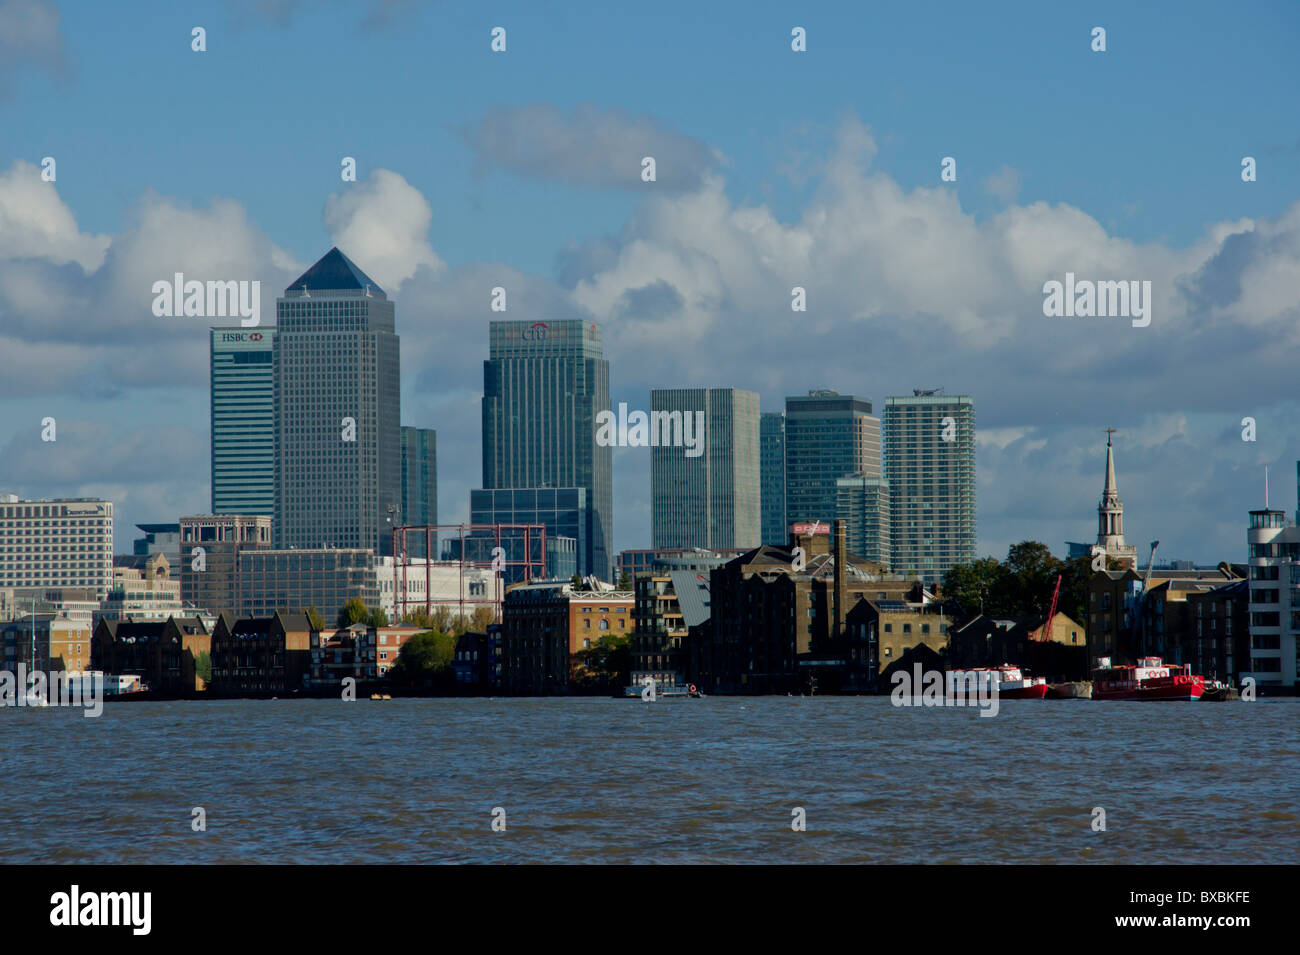 UK, England, London, Isle of Dogs/Canary Wharf Central Business ...